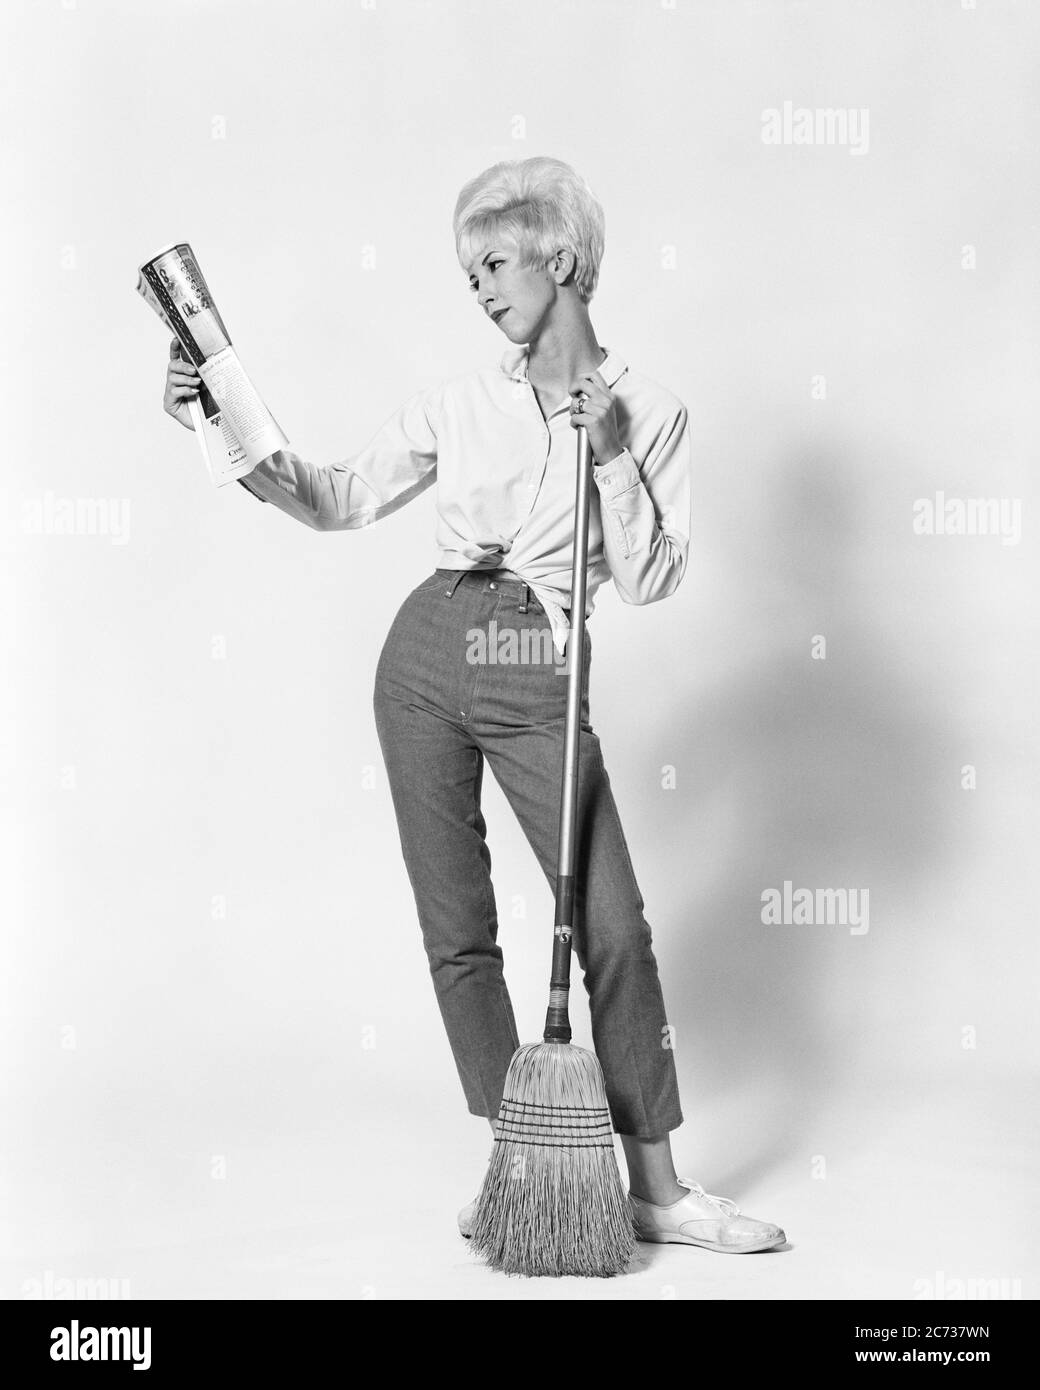 1960s BLONDE WOMAN BOUFFANT HAIRDO HOLDING BROOM READING MAGAZINE DOING HOUSEWORK CLEANING WEARING JEANS BLOUSE TIED MIDRIFF - asp jo7393 ASP001 HARS LIFESTYLE FEMALES STUDIO SHOT HEALTHINESS HOME LIFE COPY SPACE FULL-LENGTH LADIES PERSONS DOING BROOM DENIM B&W BEEHIVE GOALS HOMEMAKER HUMOROUS LAZY HOMEMAKERS STYLES SWEEPING COMICAL OPPORTUNITY BLOUSE HOUSEWIVES CONNECTION COMEDY ESCAPE STYLISH SUPPORT BLUE JEANS DISTRACTED FASHIONS HAIRDO INFORMAL MID-ADULT MID-ADULT WOMAN MIDRIFF SWEEP TEASED TWILL YOUNG ADULT WOMAN BLACK AND WHITE BOUFFANT CASUAL CAUCASIAN ETHNICITY DIVERSION OLD FASHIONED Stock Photo